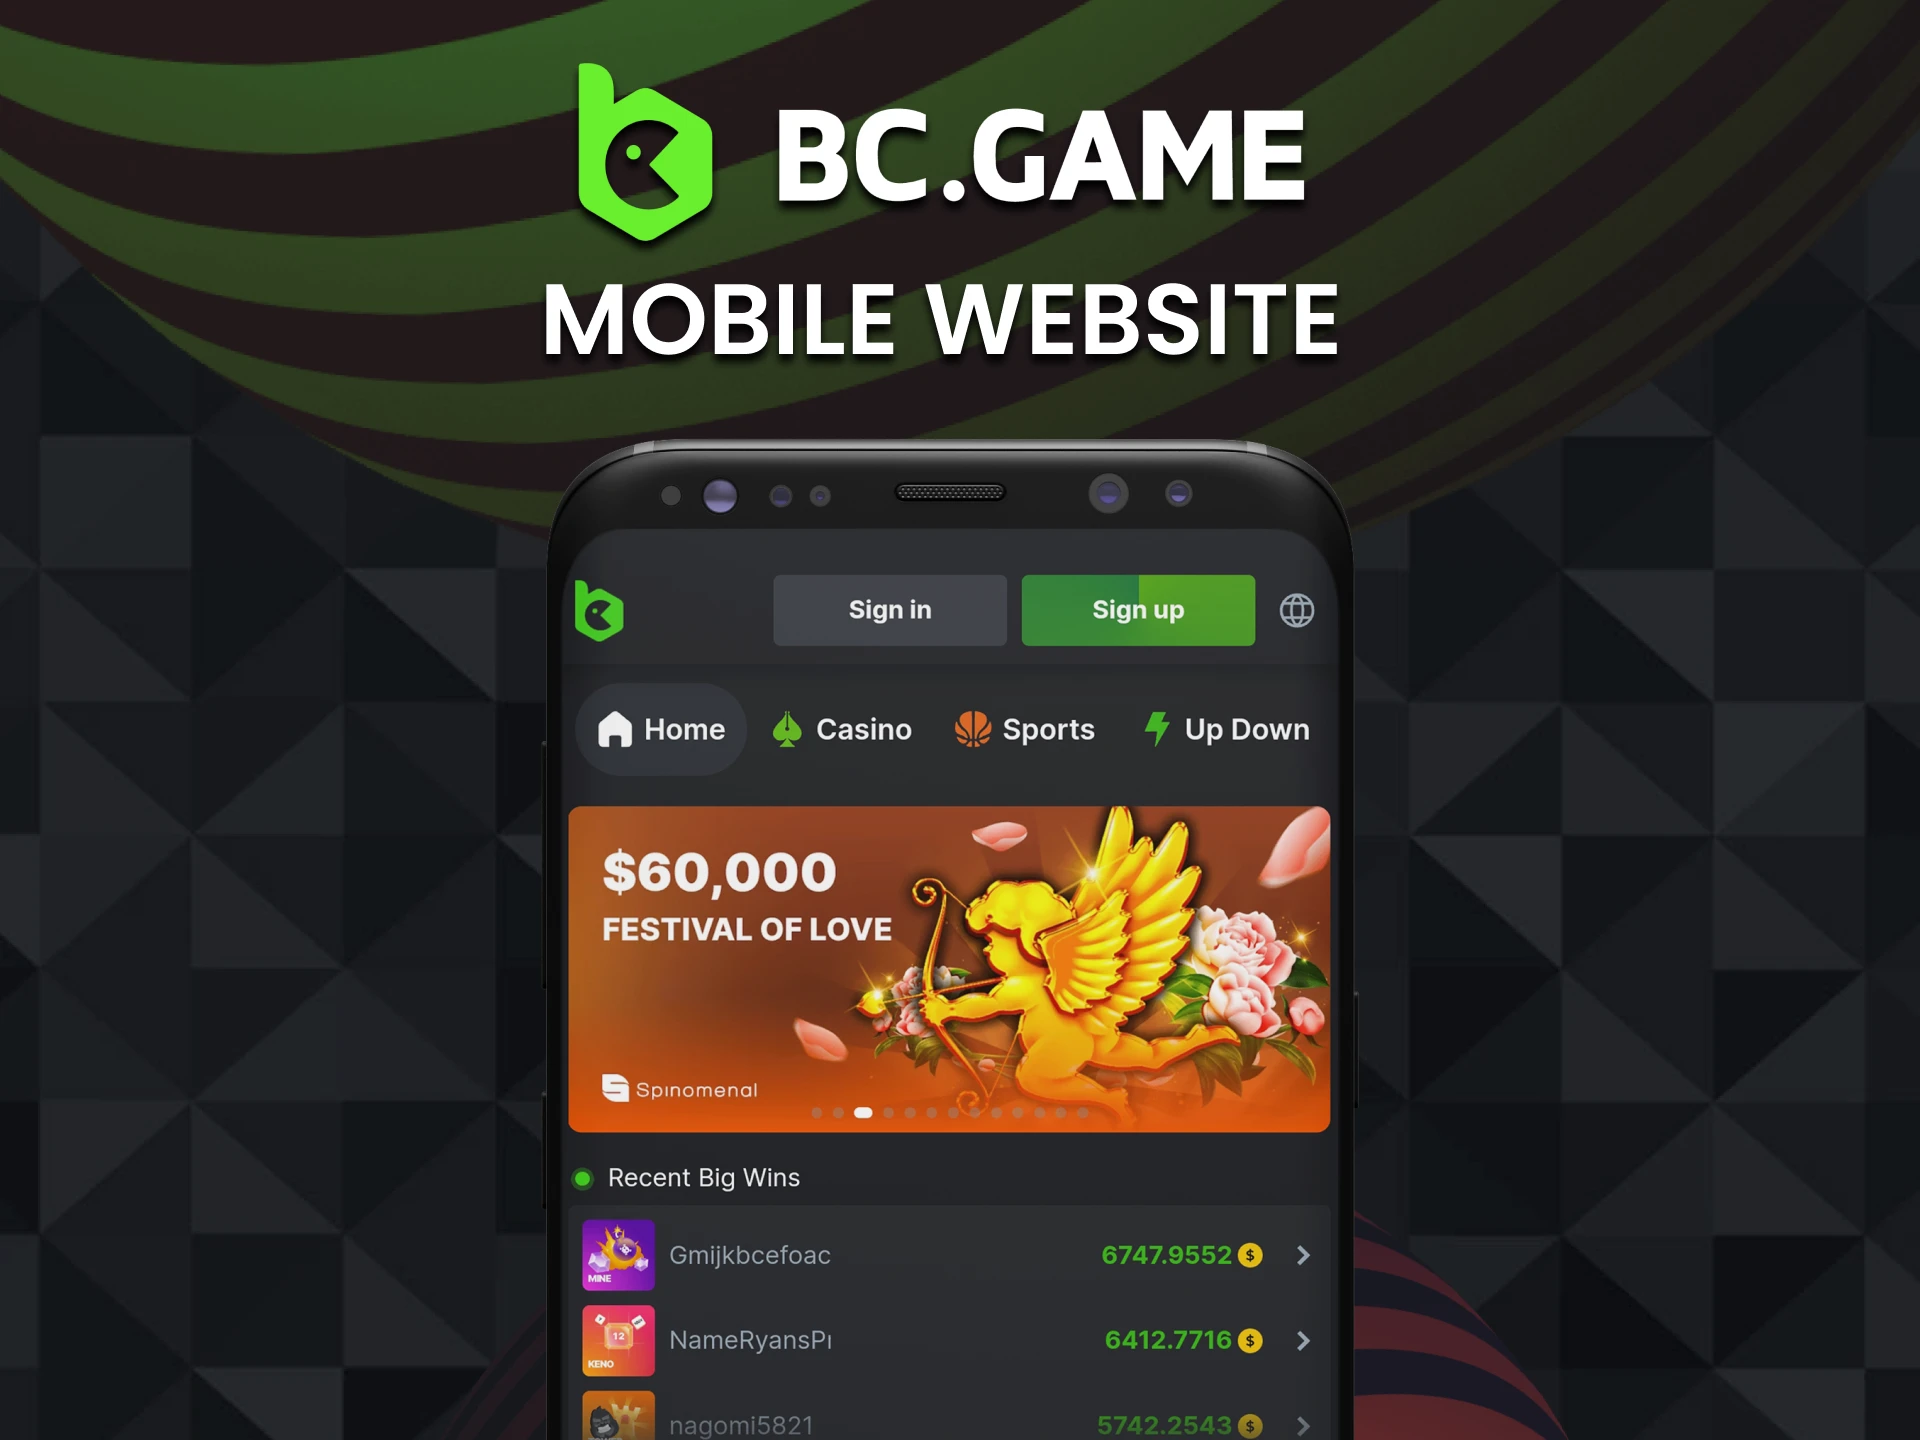 You can use the mobile version of BC Game website without downloading the app.